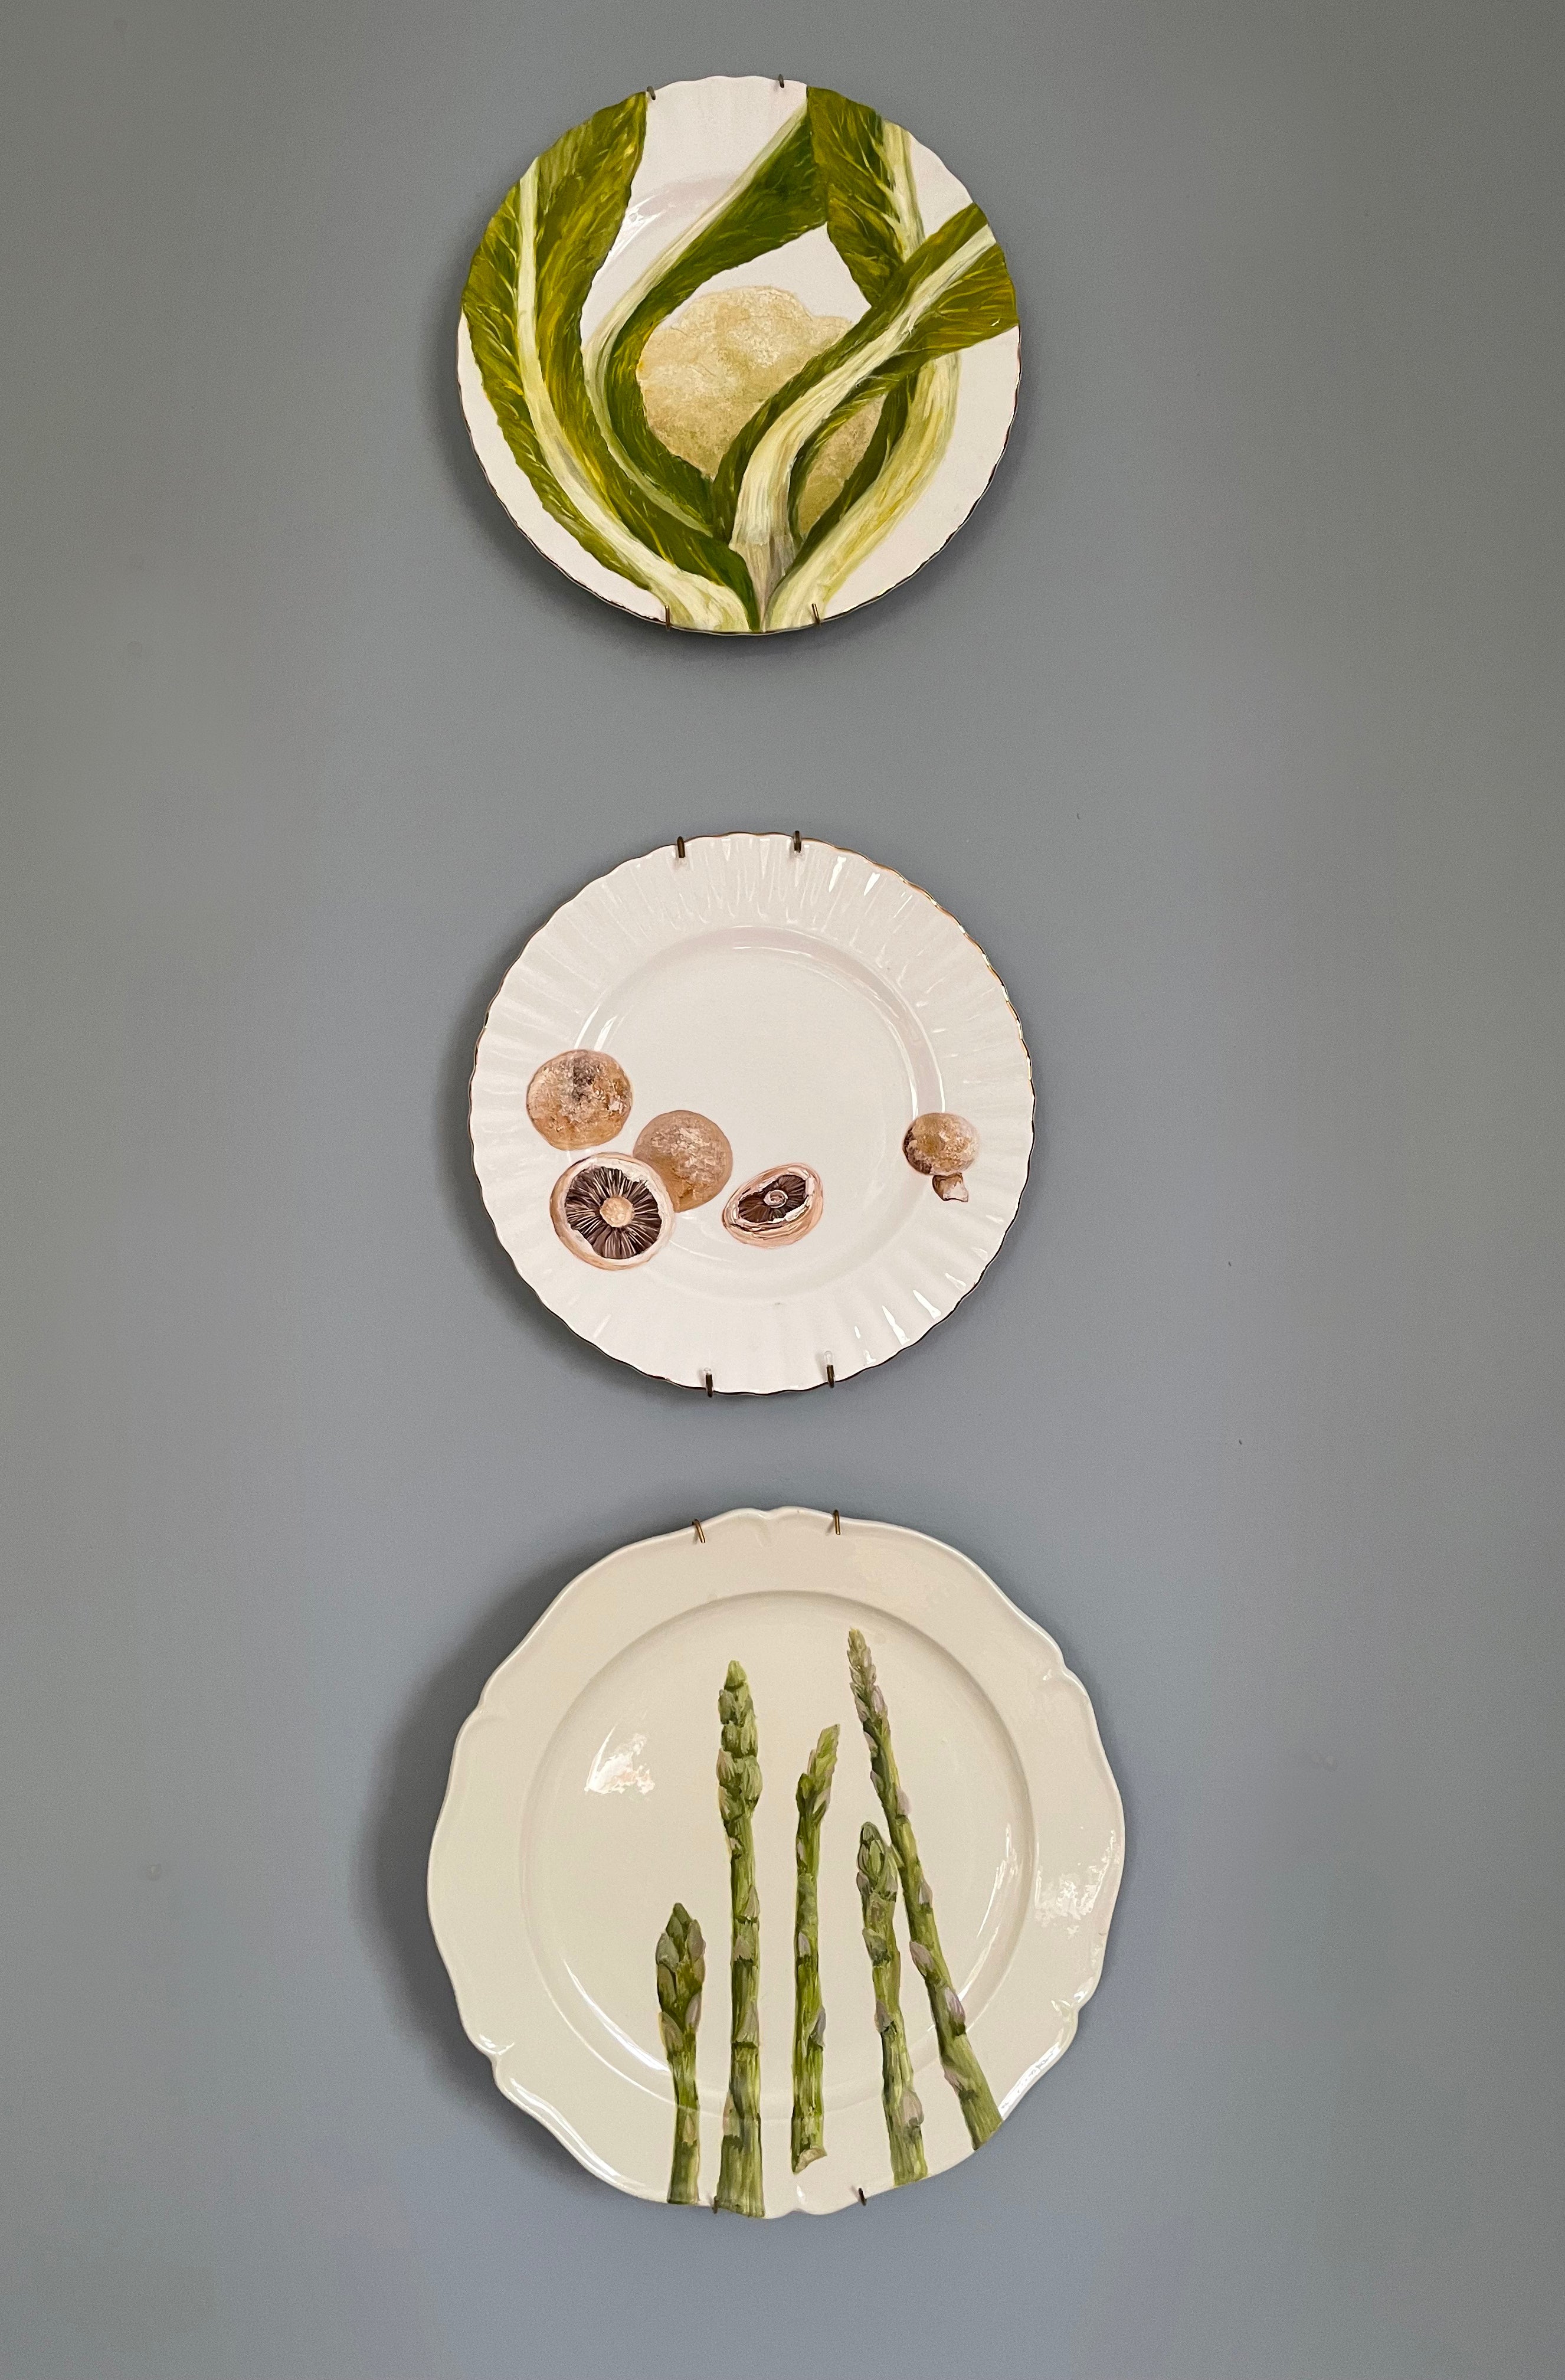 Plated: original fine art oil painting on a vintage French plate - 5 asparagus spears